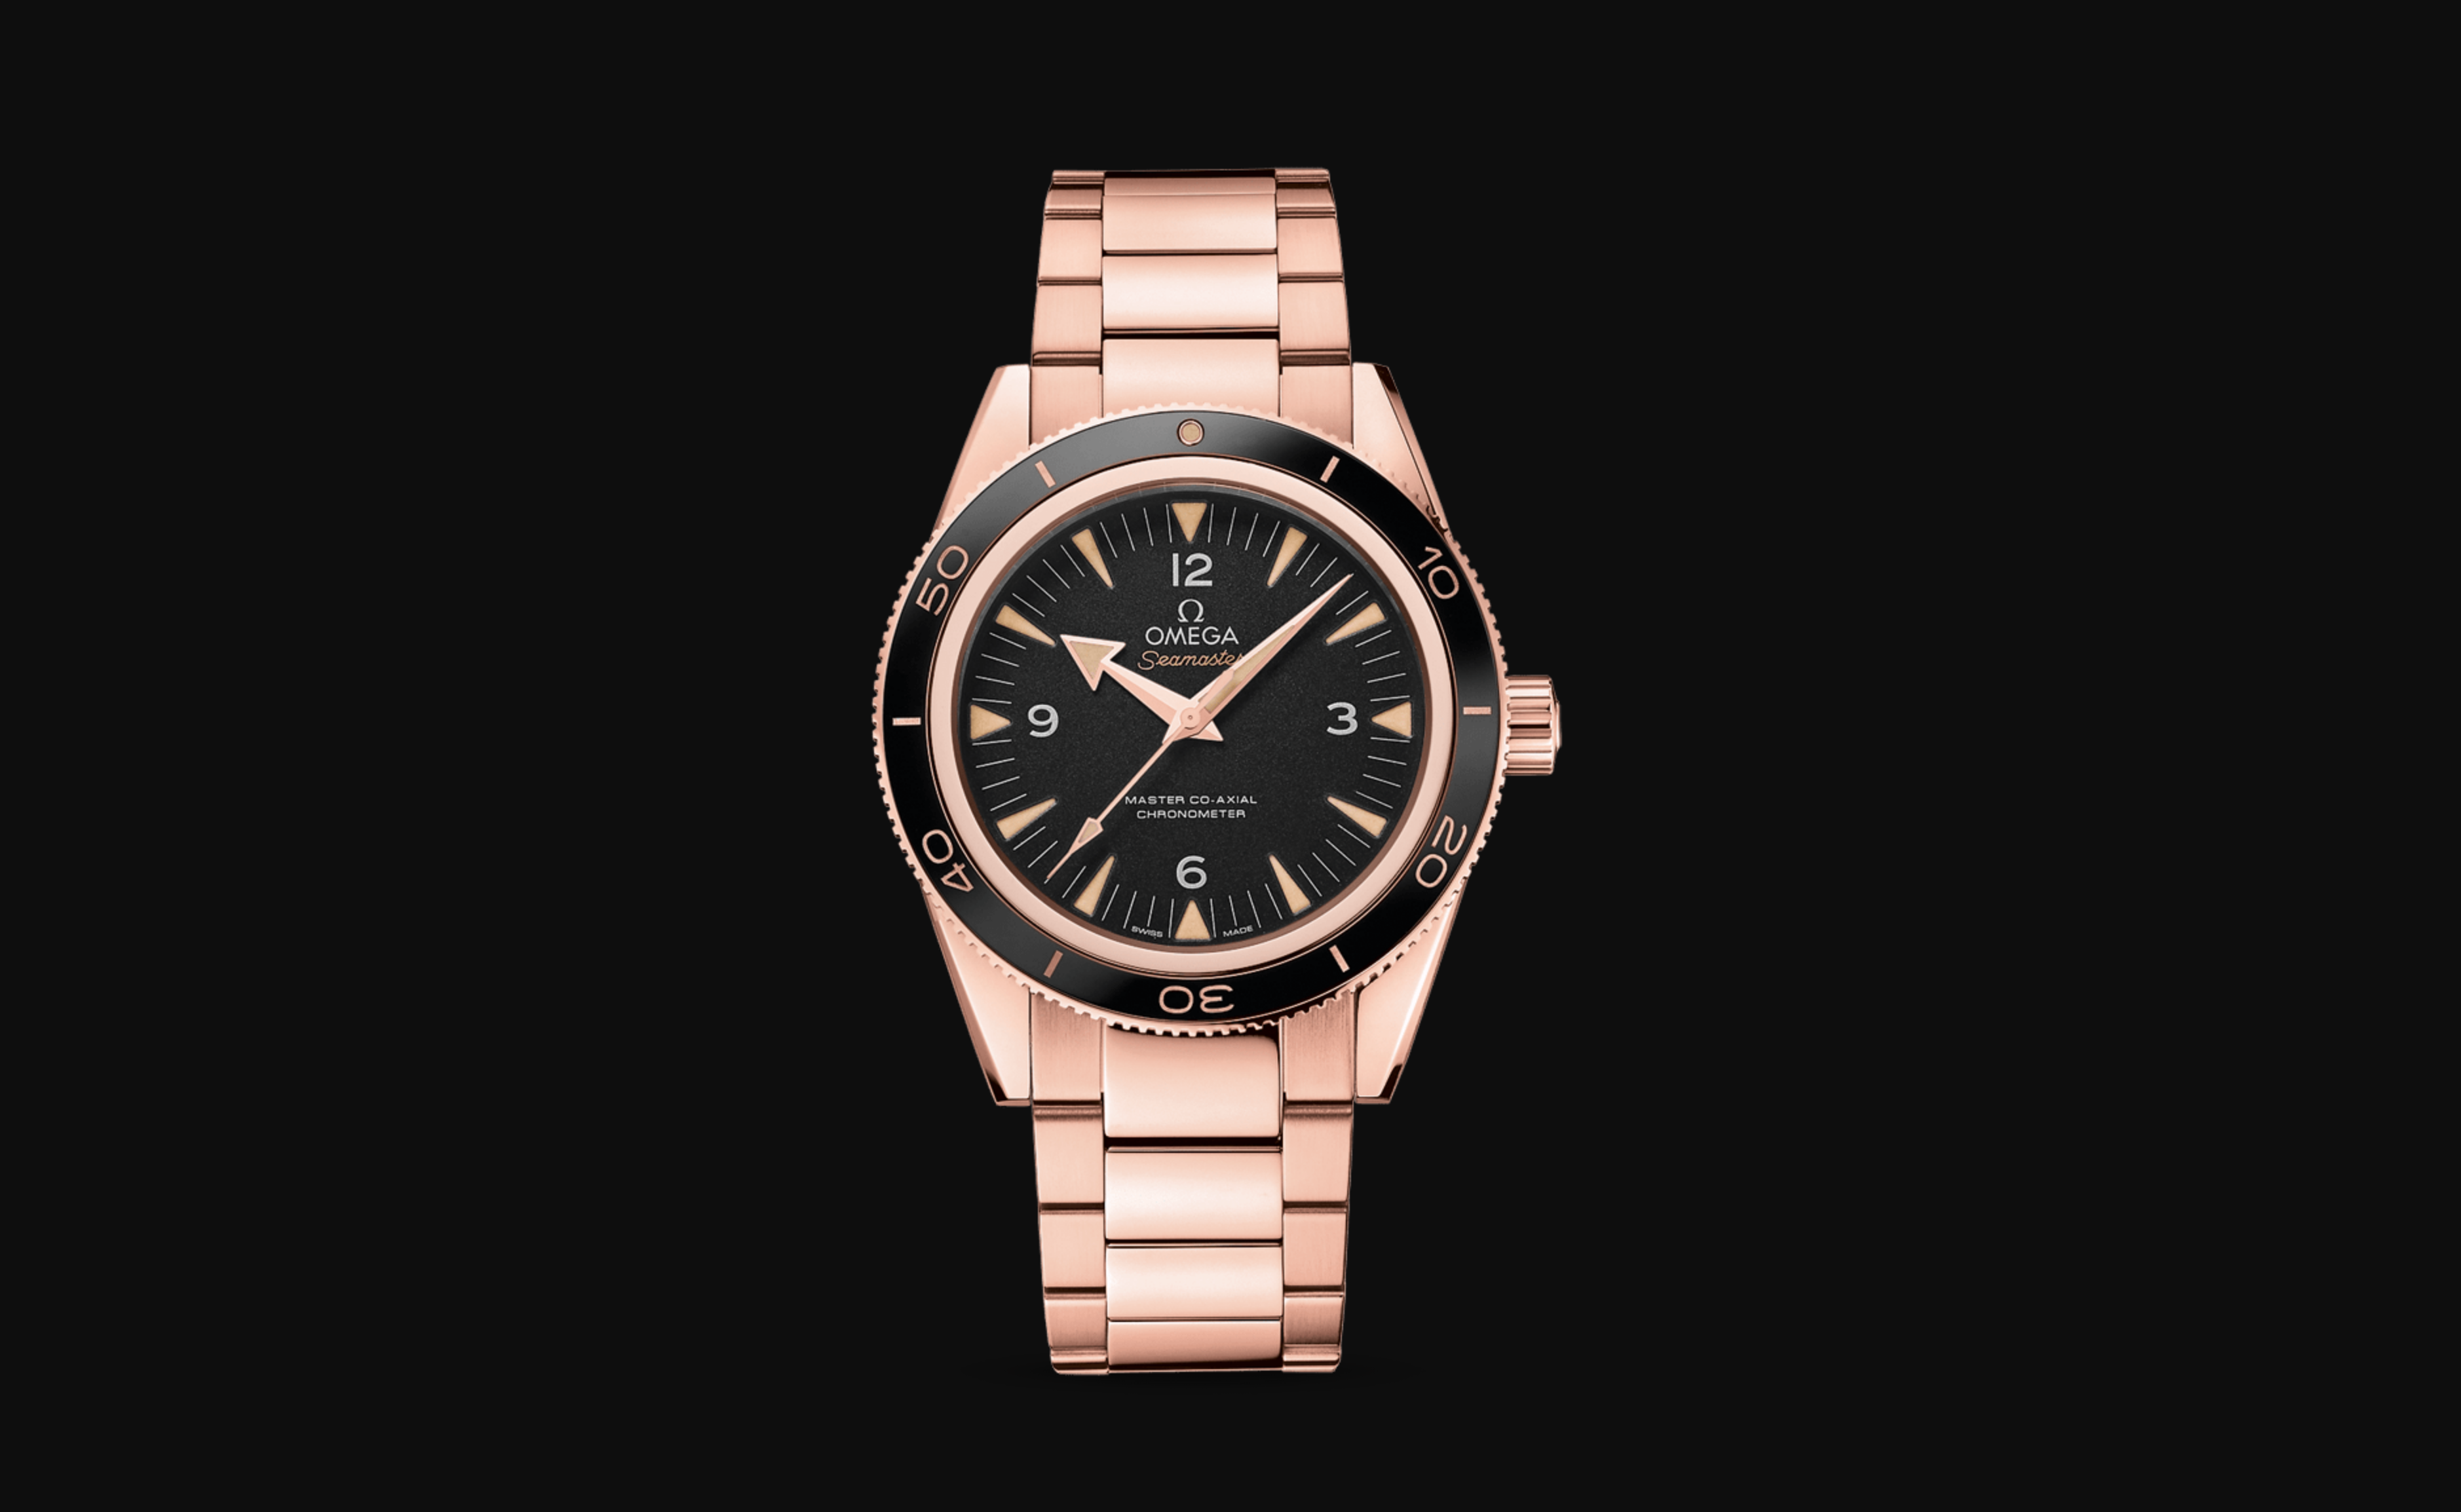 The Omega Seamaster 300 Master Co-Axial in Sedna Gold